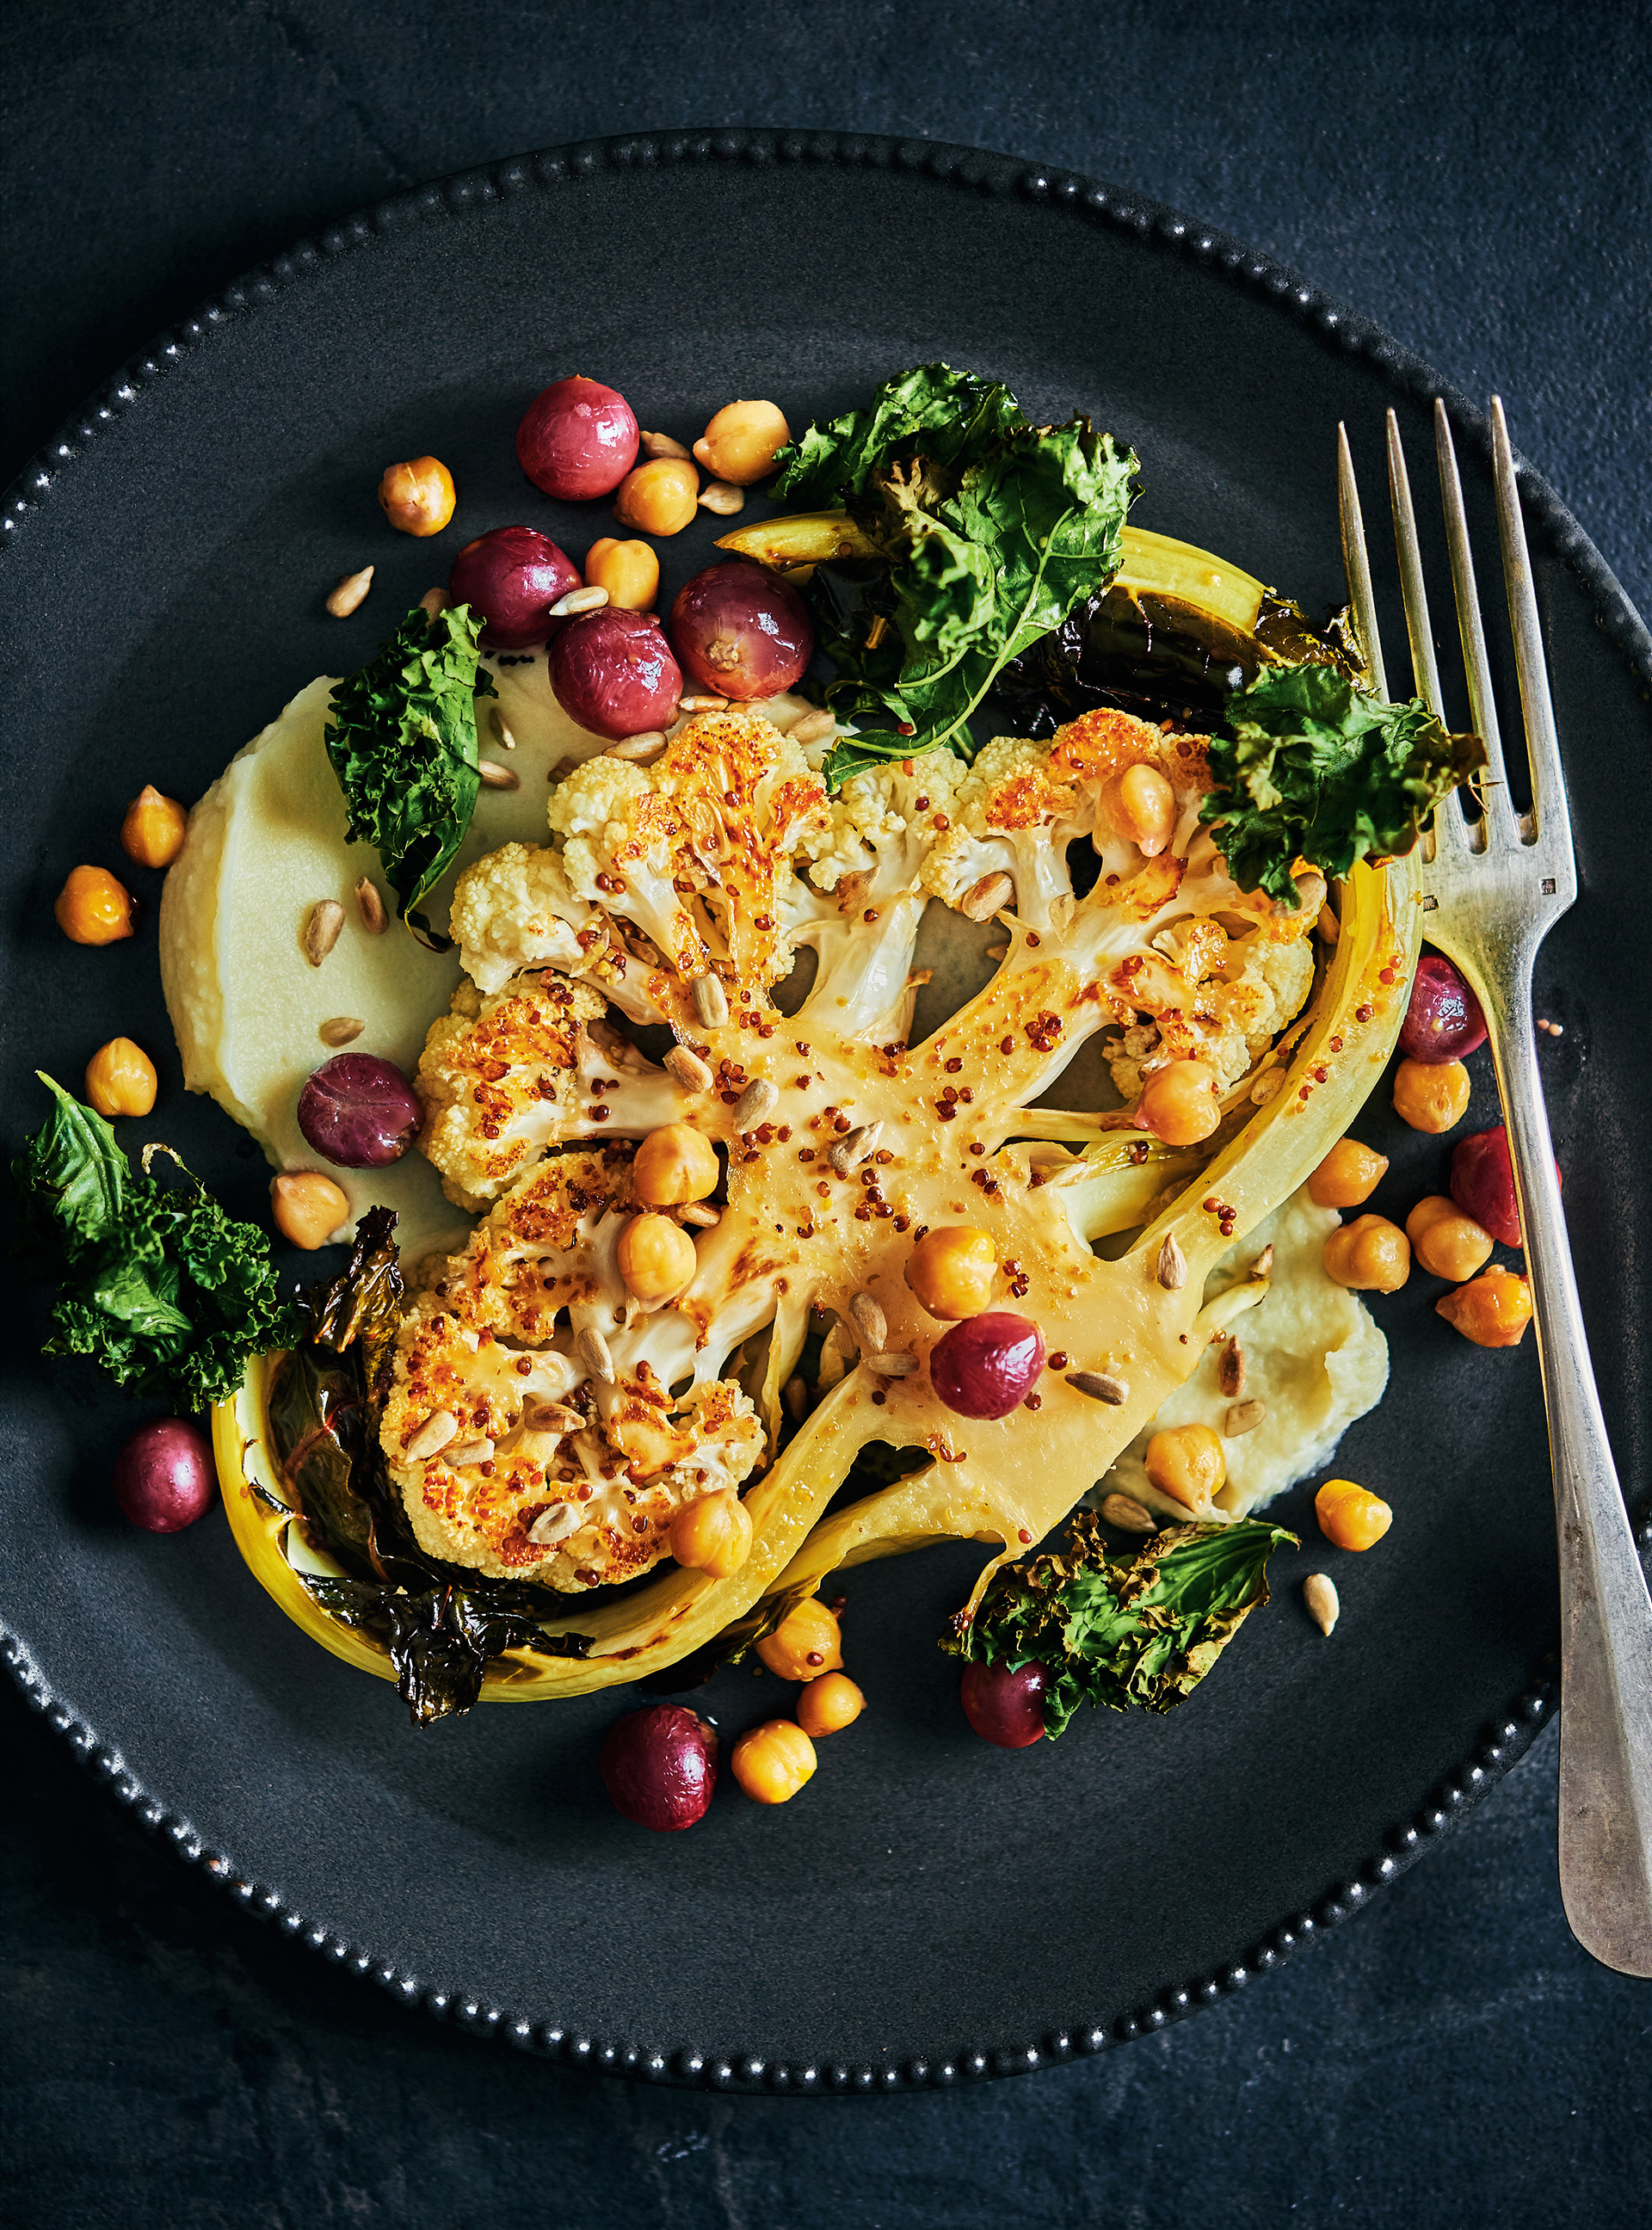 Cauliflower Steaks with Chickpeas, Grapes and Kale